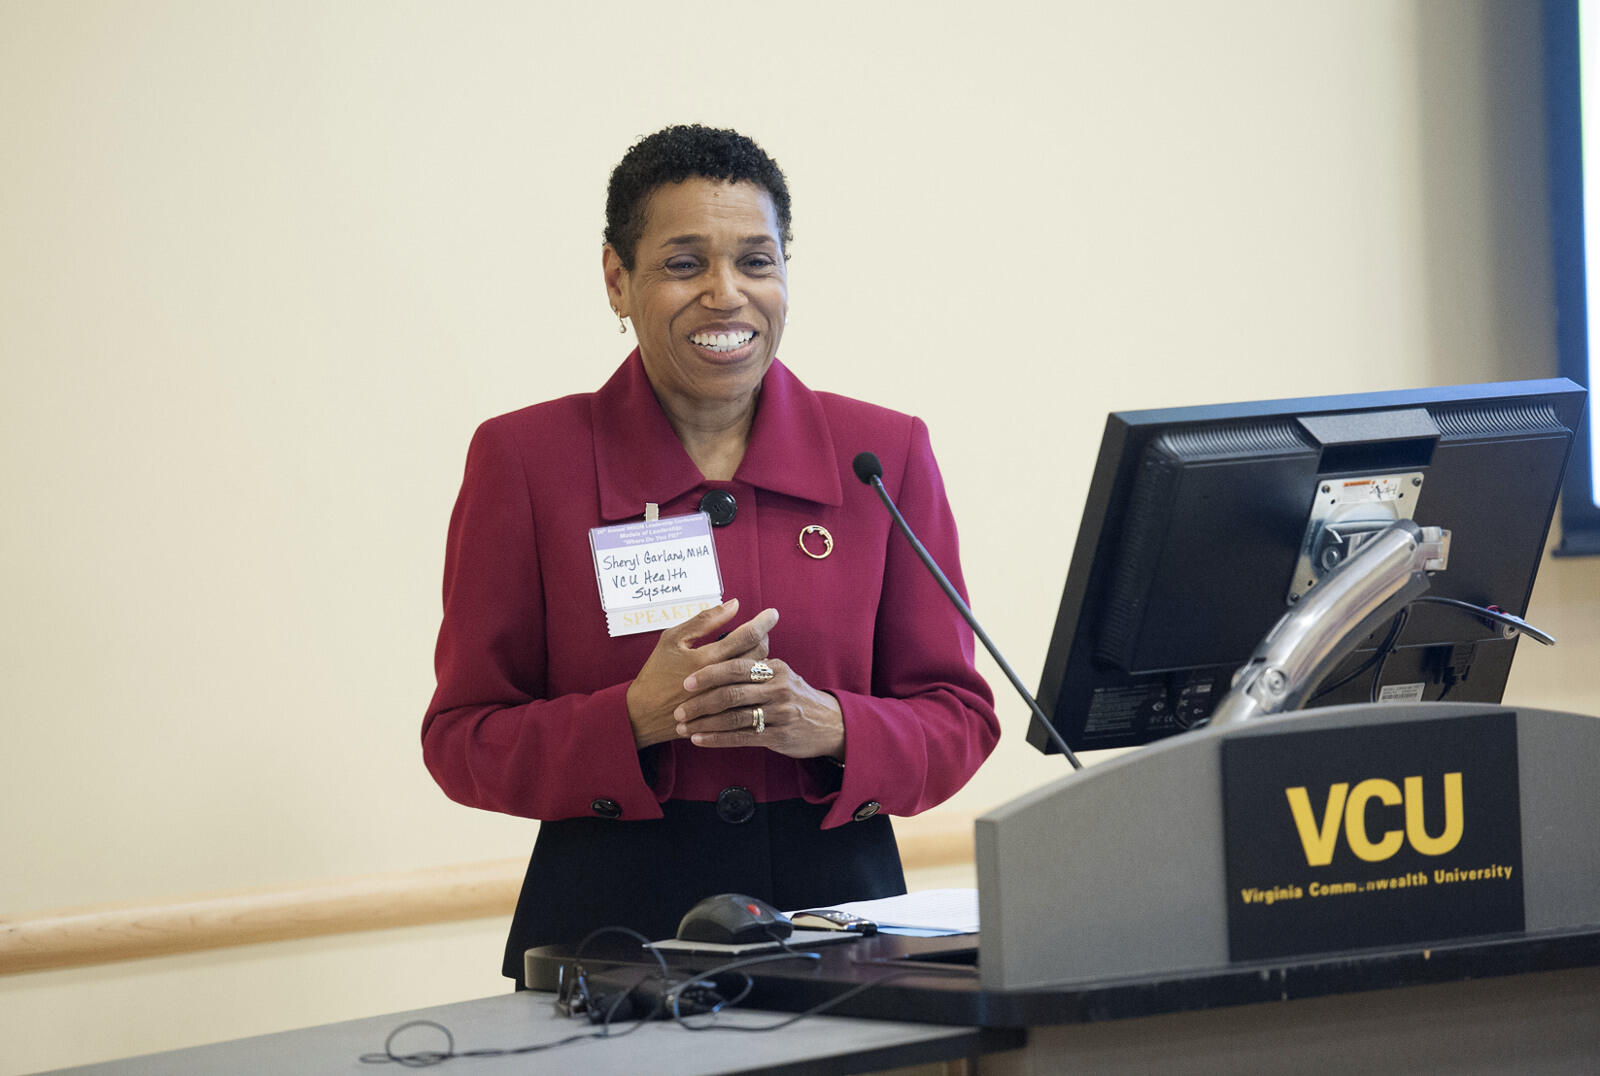 Sheryl Garland, vice president for health policy and community relations at VCU Health, addresses the audience at the 26th annual Women in Science, Dentistry, and Medicine conference. (Photos by Tom Kojcsich, University Marketing)